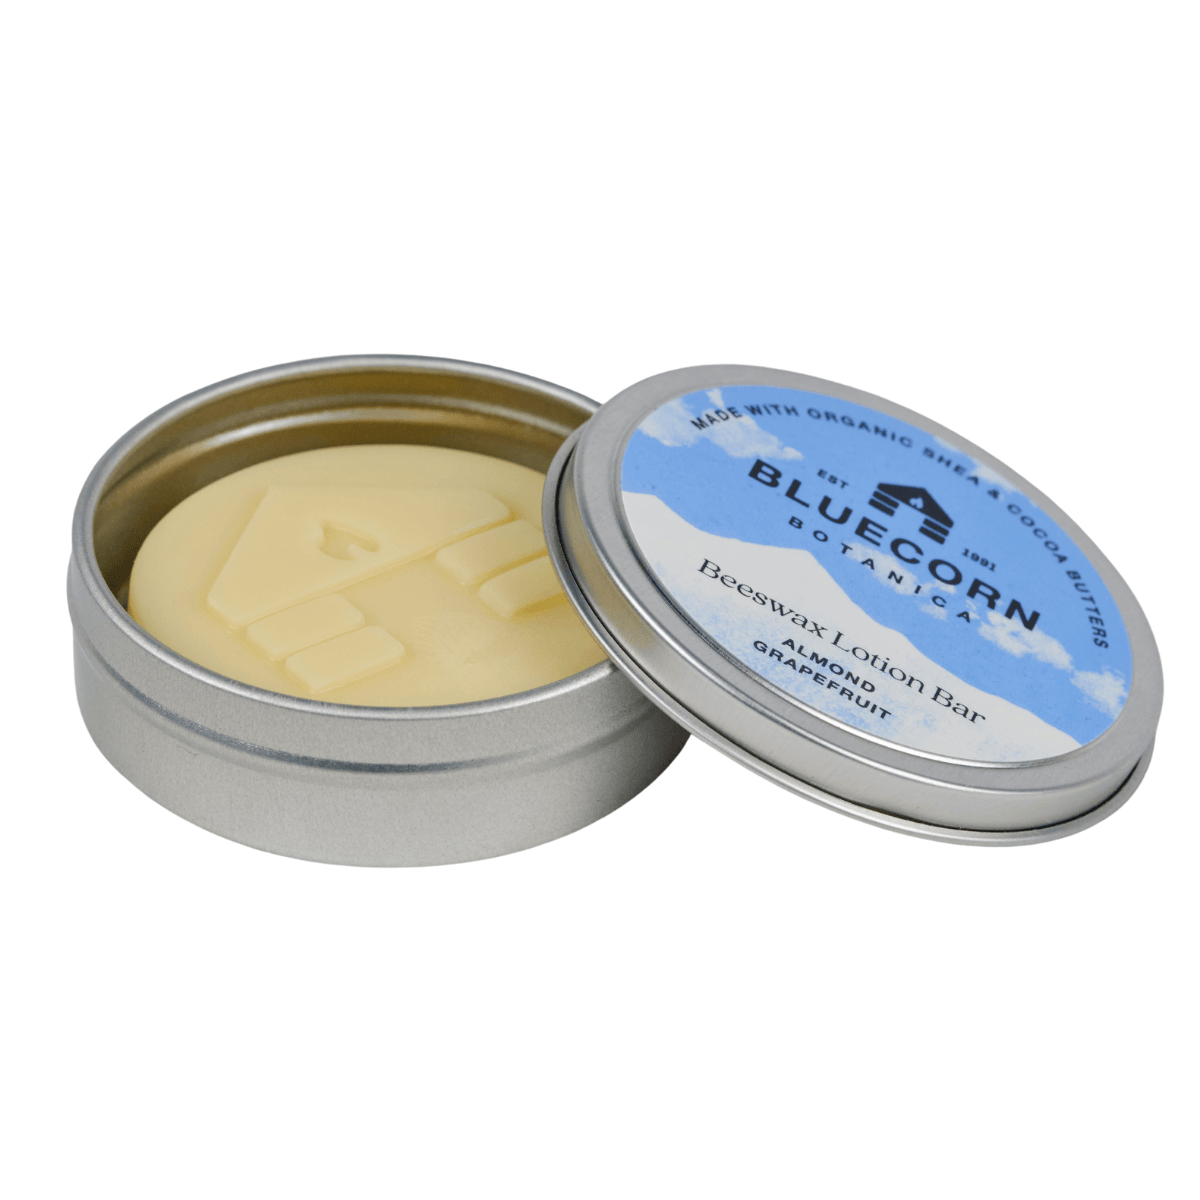 Bluecorn Botanica Beeswax Lotion Bar in Almond Grapefruit. Made with Organic Shea Butter, Organic Cocoa Butter, Avocado Oil, Apricot Oil, Cappings Beeswax, Essential Oils. Using the warmth of your hands, these solids bars will turn into lotions. Can be used all over the body and come in a convenient tin. Features blue Bluecorn Botanica Label on aluminum tin with opened lid showing lotion bar. Lotion bar is cream in color and features Bluecorn cabin.